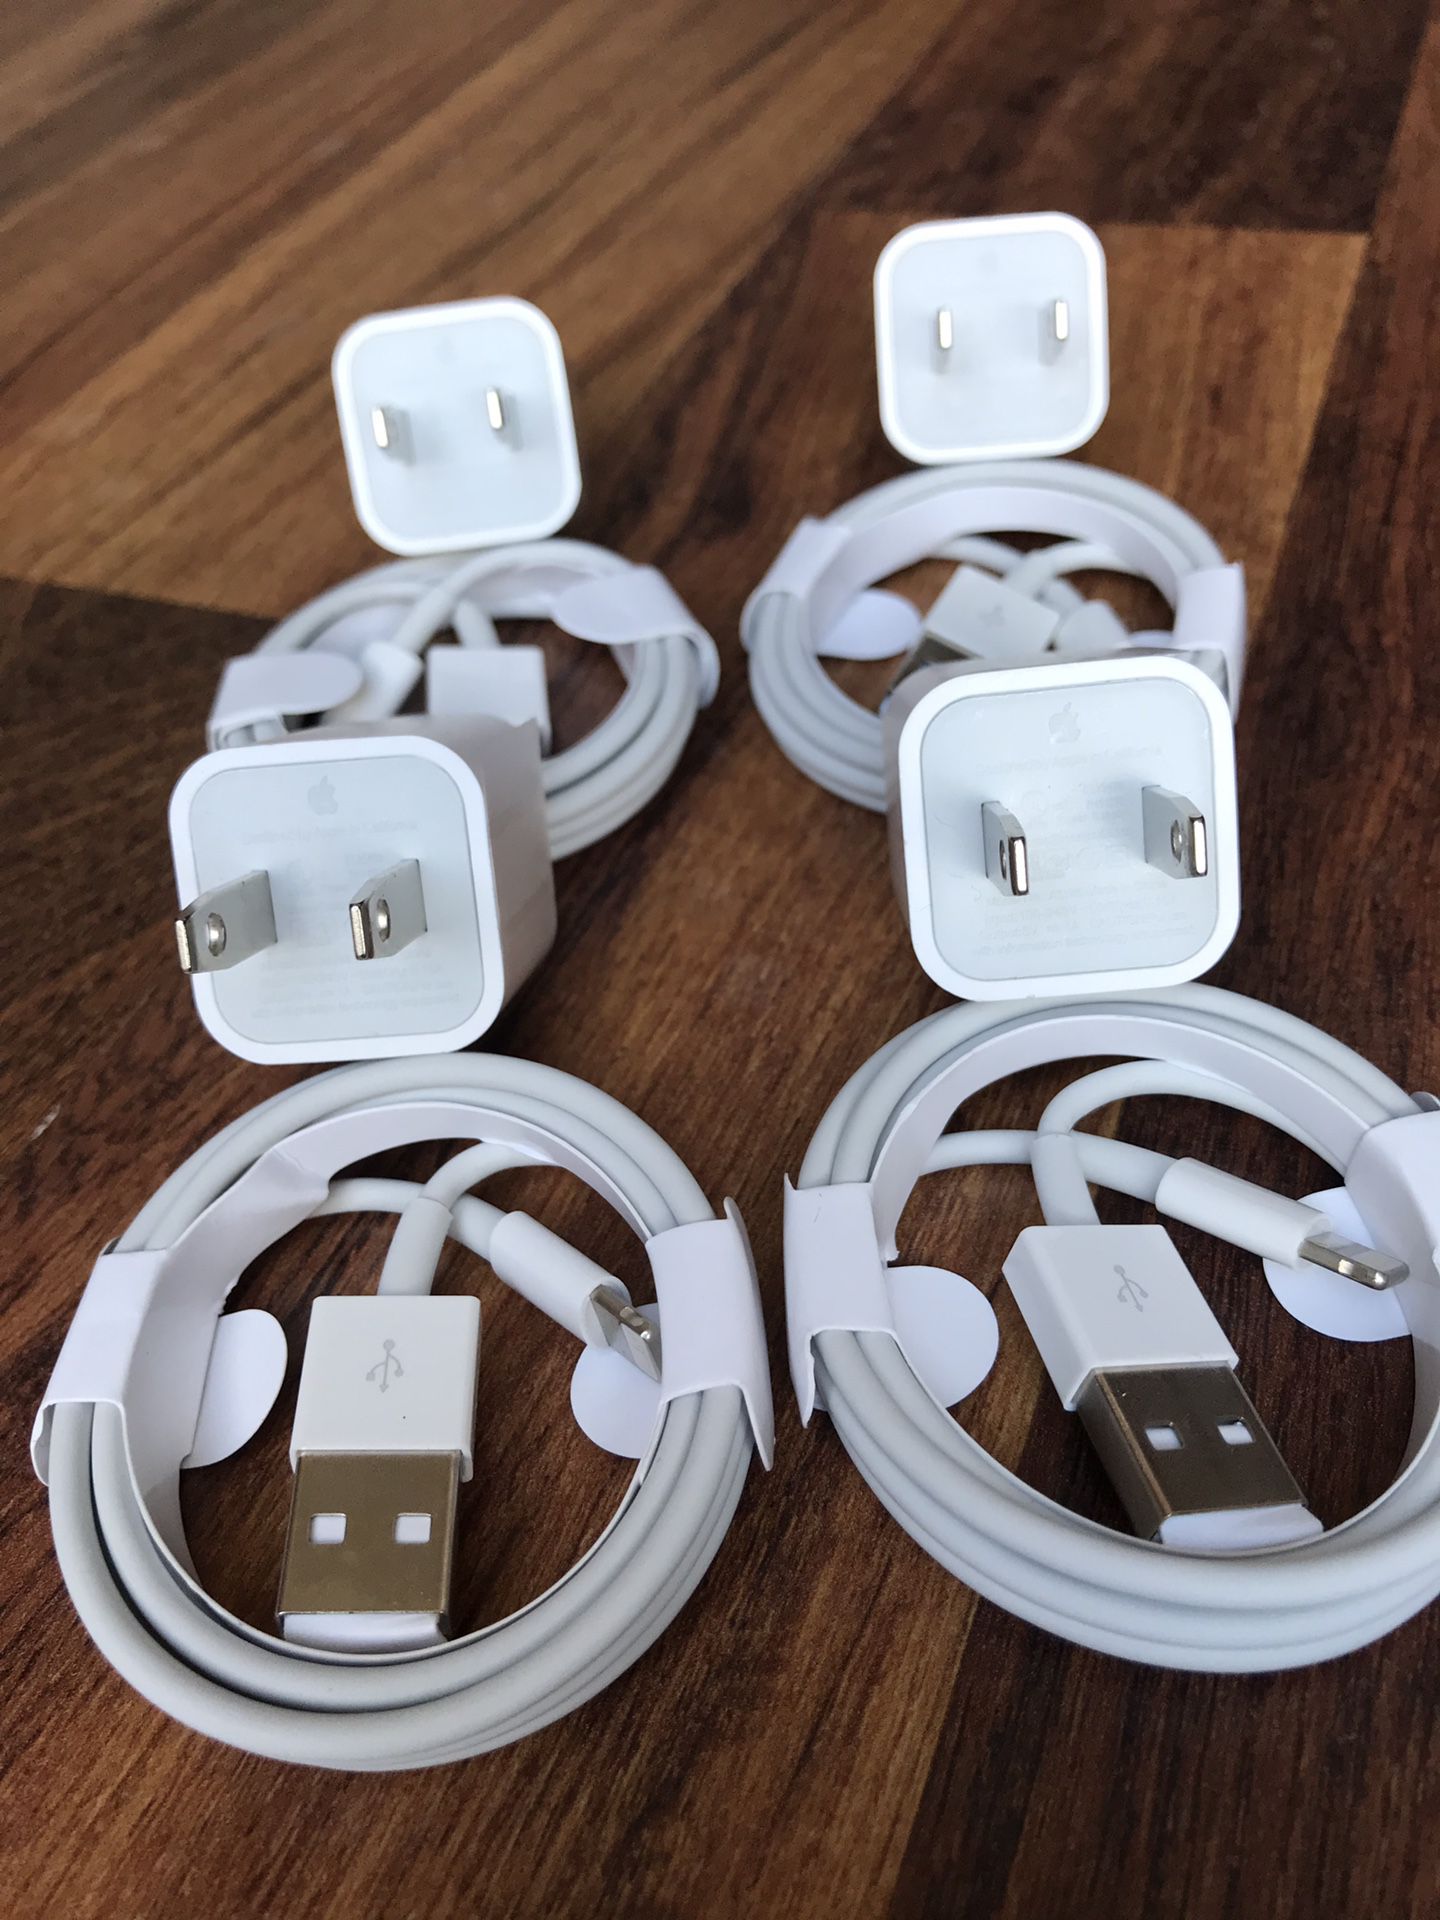 4 sets of brand new Apple iPhone charger